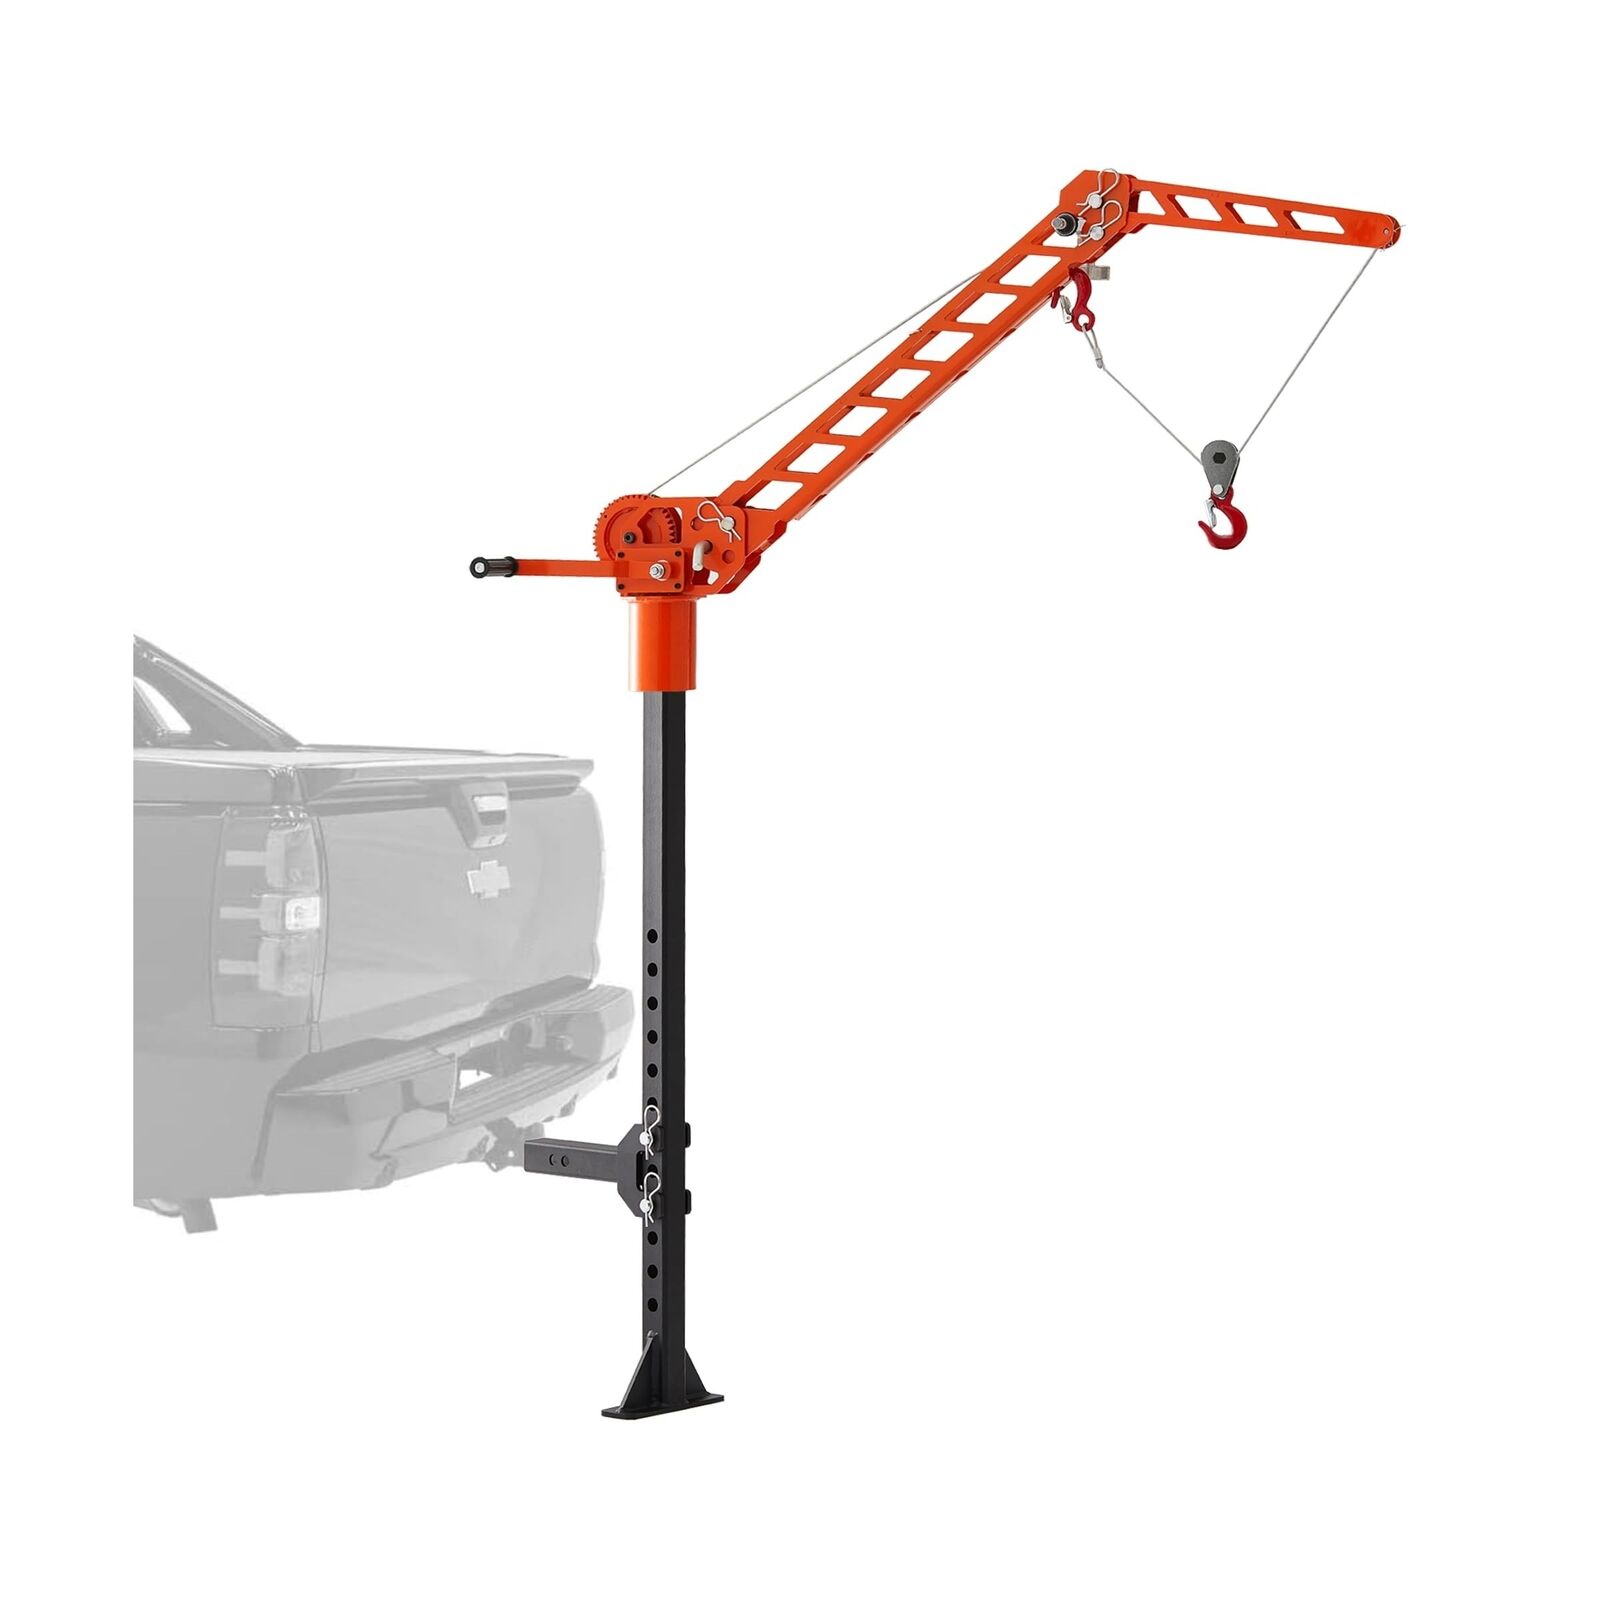 Truck Hitch Mounted Crane- 600lbs Load Capacity, 2 Inch Receiver Hitch Hoist,...